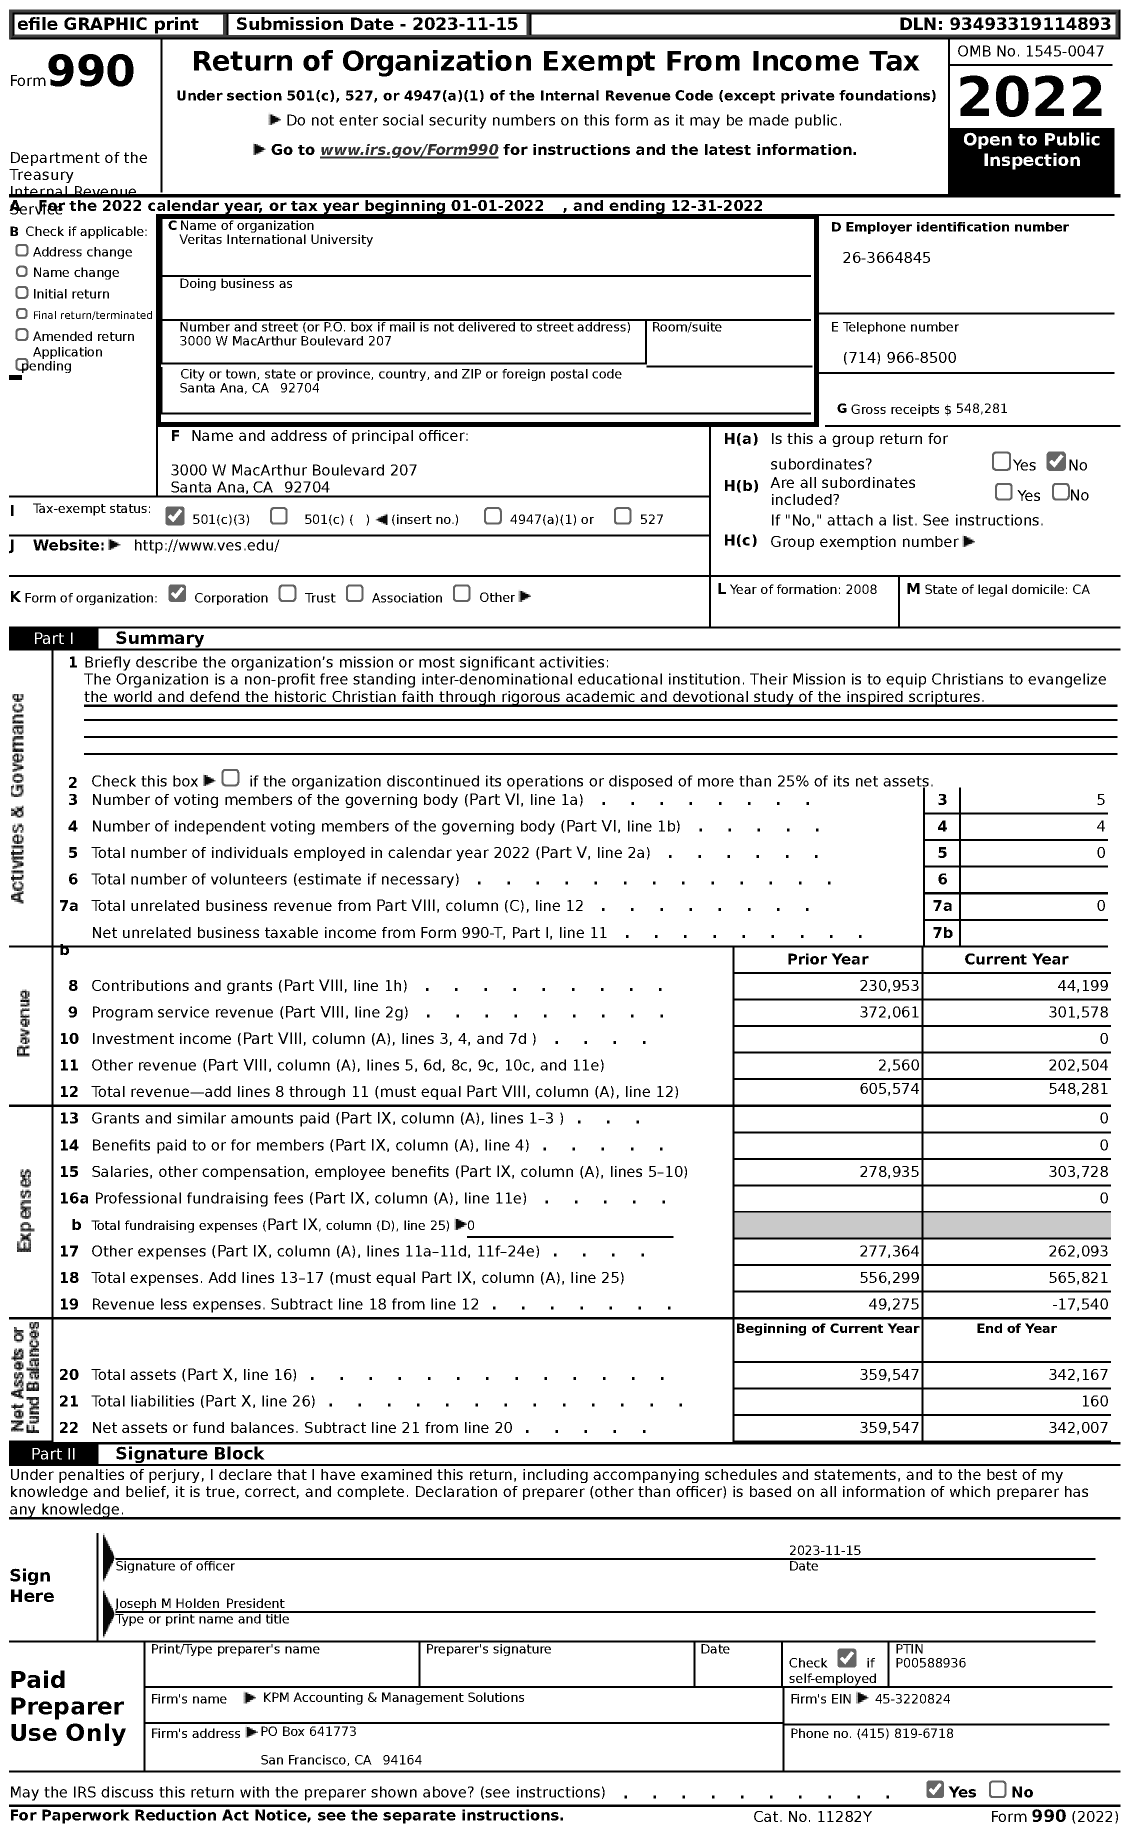 Image of first page of 2022 Form 990 for Veritas International University